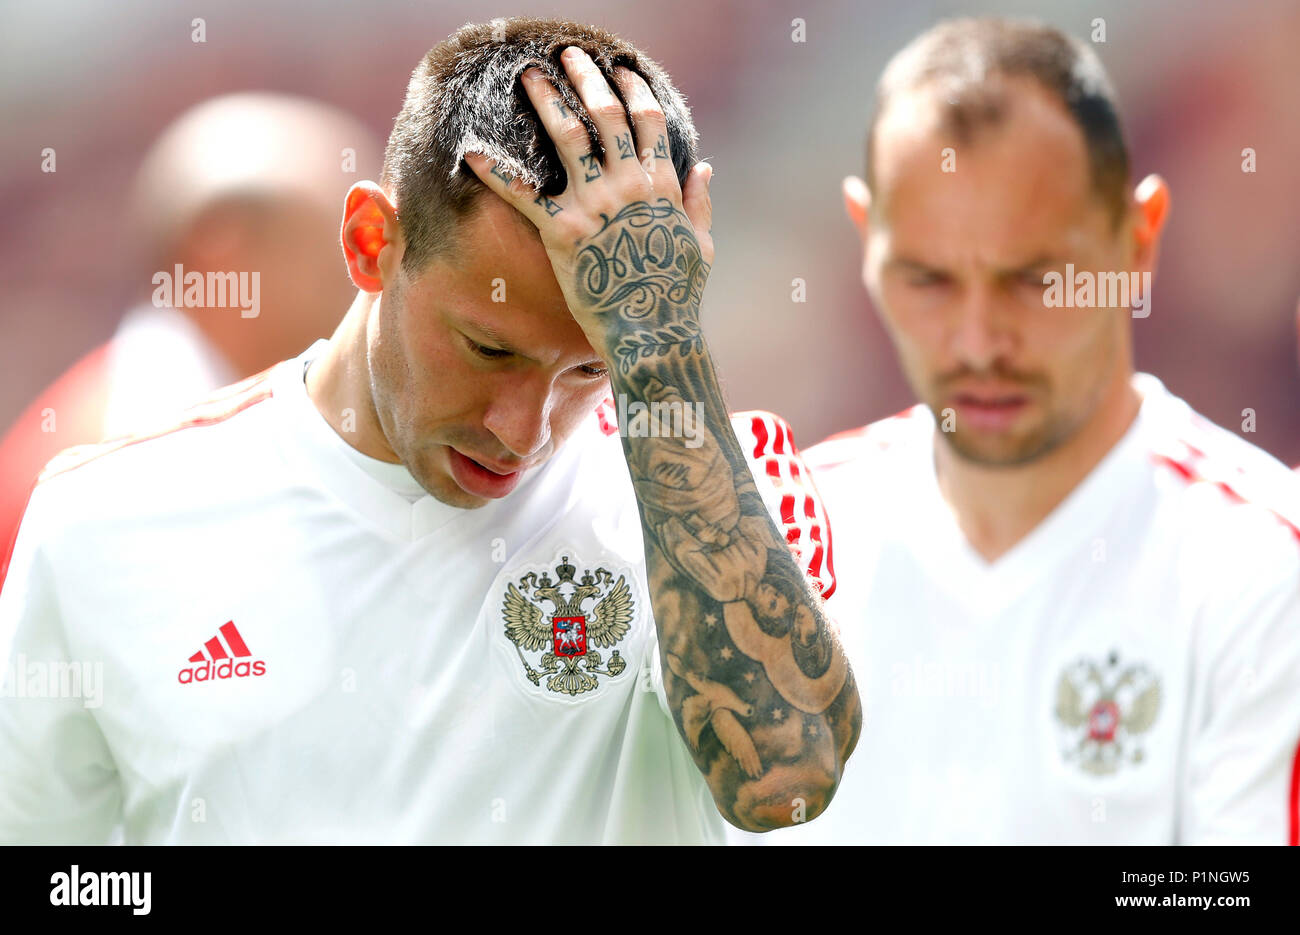 Moscow, Russia. 13th June 2018.  Fyodor Smolov of Russia during the official training before the opening match of the 2018 FIFA World Cup between Russia and Saudi Arabia, held at the Lujniki Stadium in Moscow, Russia. (Photo: Rodolfo Buhrer/La Imagem/Fotoarena) Credit: Foto Arena LTDA/Alamy Live News Stock Photo